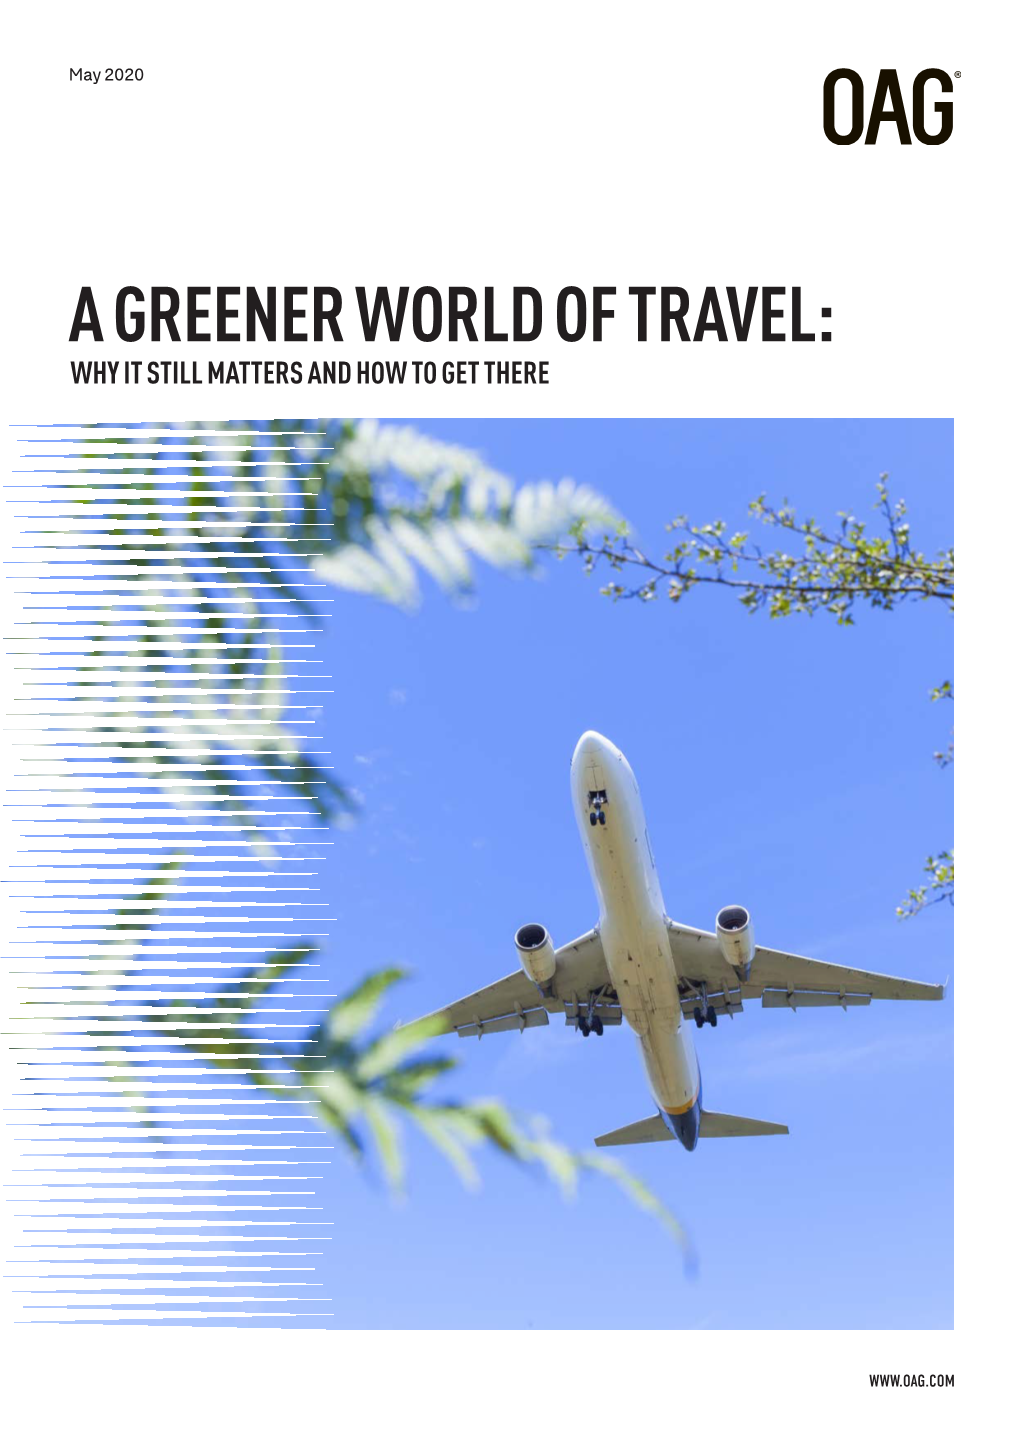 A Greener World of Travel: Why It Still Matters and How to Get There